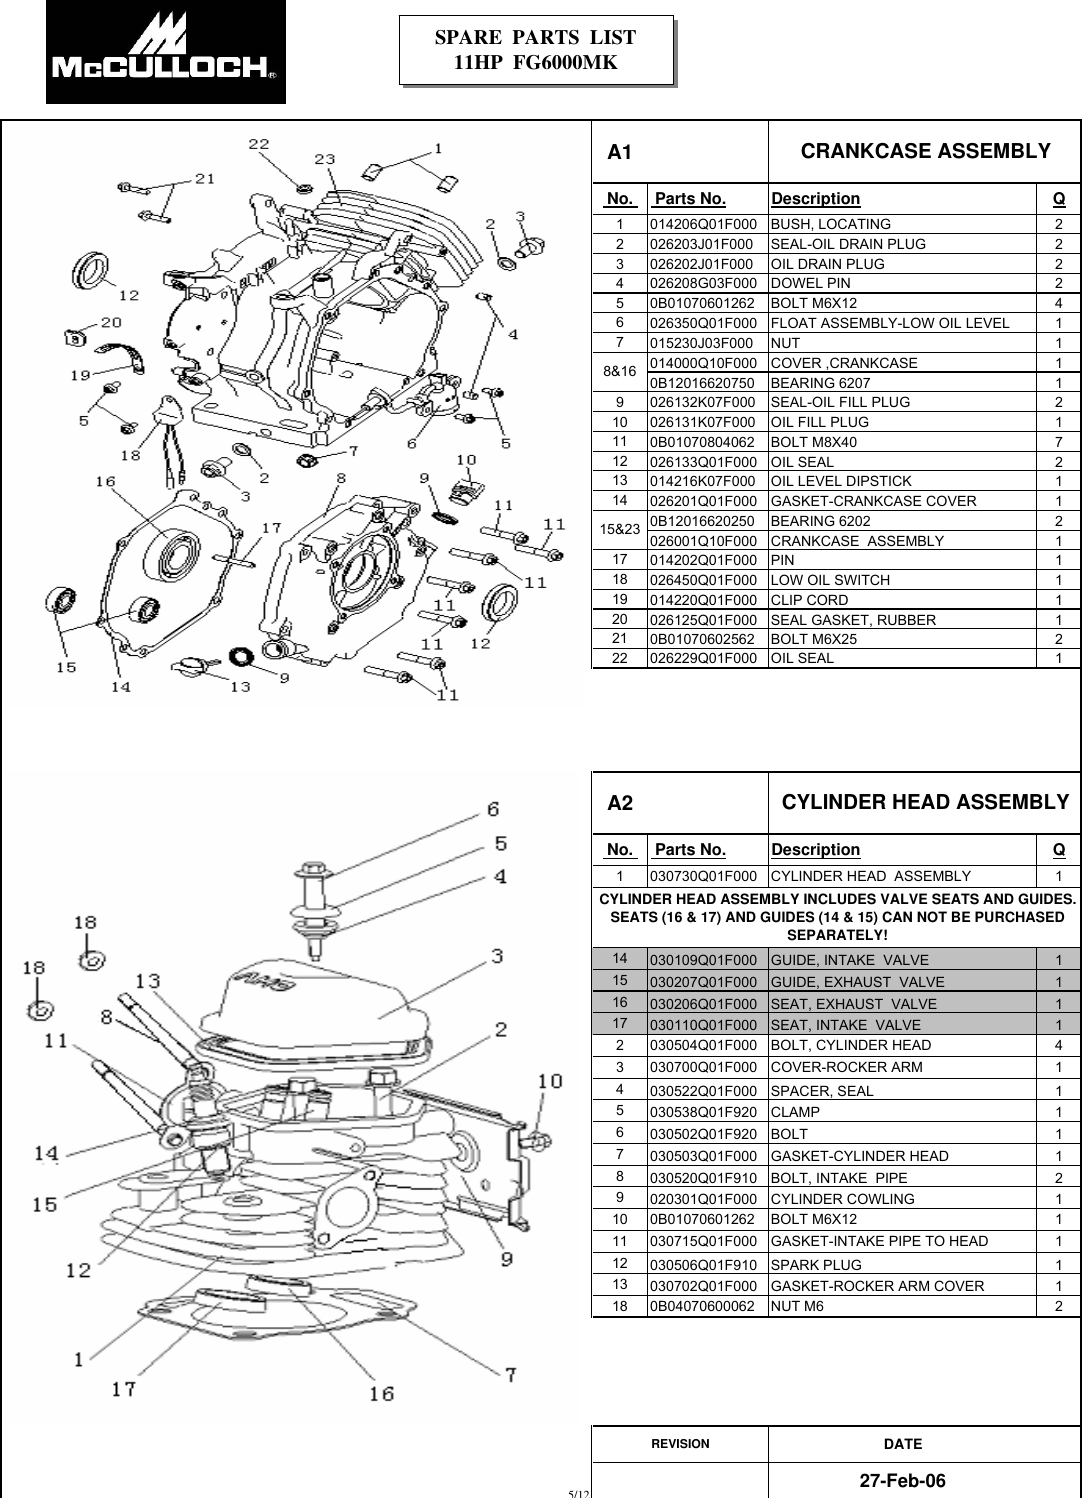 Page 5 of 12 - Mcculloch Mcculloch-Fg6000Mkud-C-Parts-List- IPL, McCulloch, FG6000MK, 2008-06, 7096FG6024, 966991401, US  Mcculloch-fg6000mkud-c-parts-list